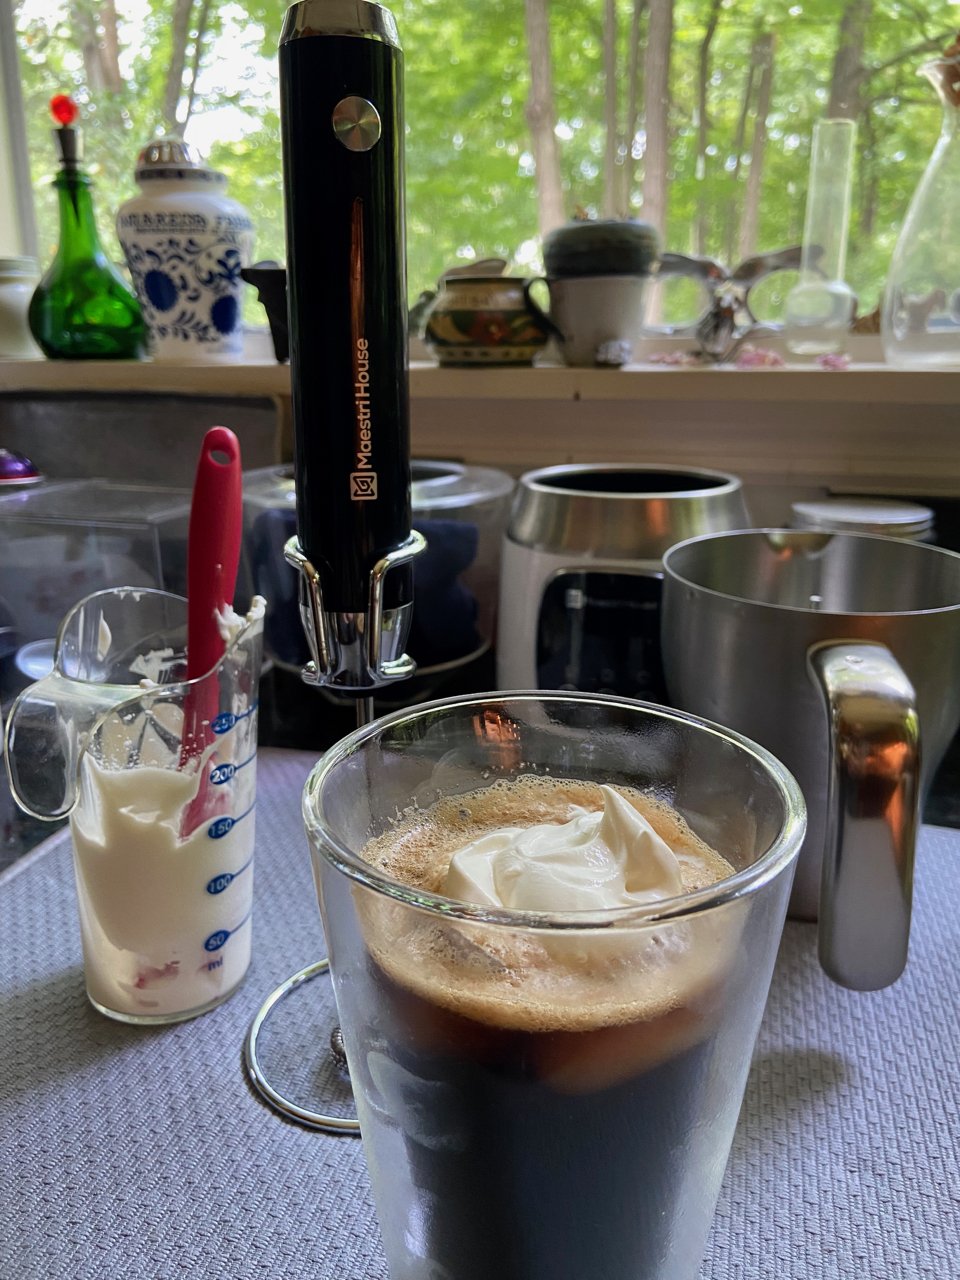  New England Stories: MILK FROTHER